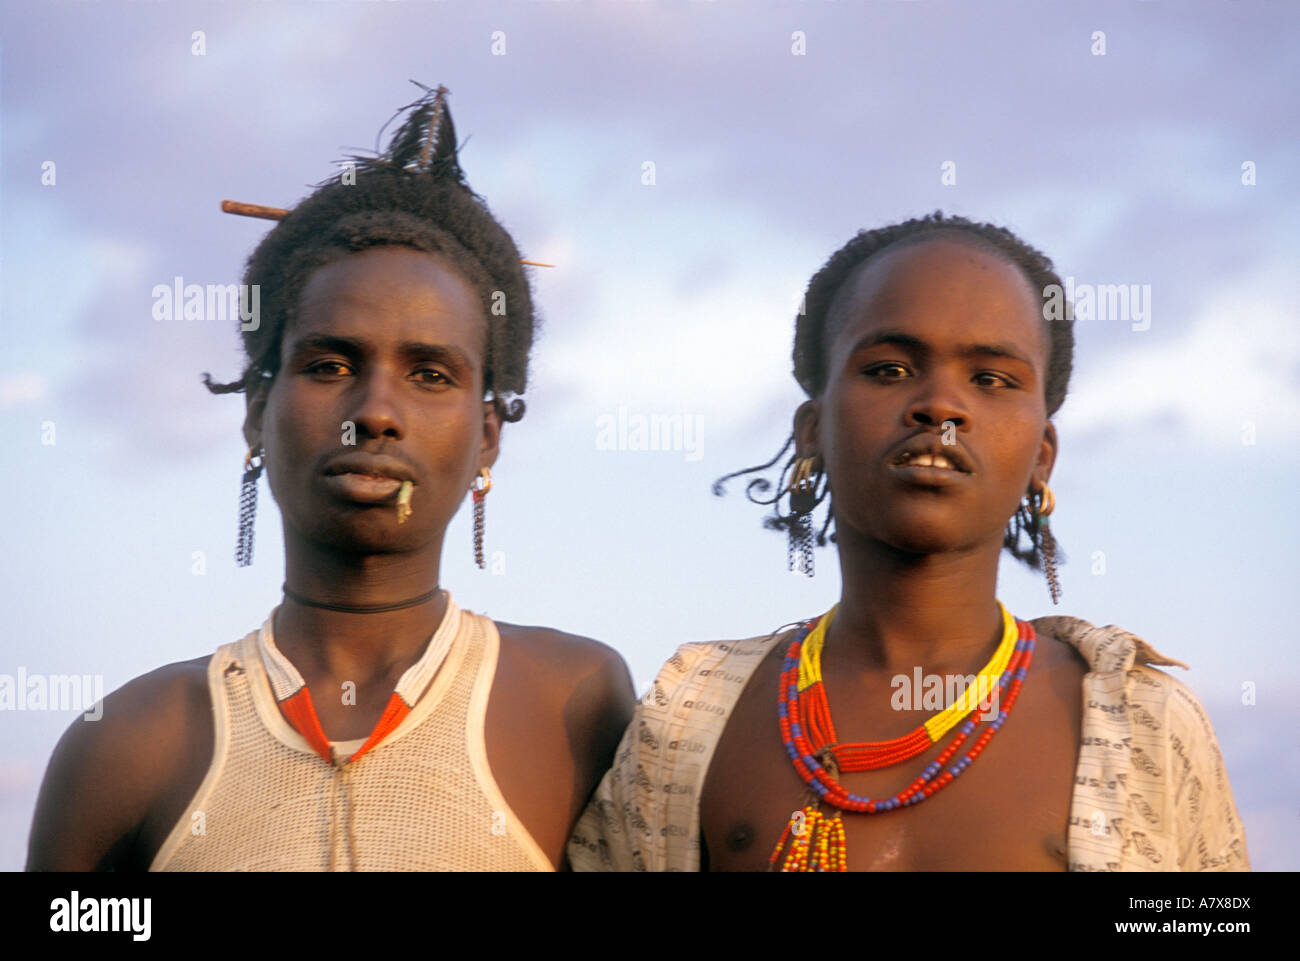 Two Hamar boys with traditional hairstyles and jewelry, despite their Western-style clothes, in Ethiopia's Omo River region Stock Photo